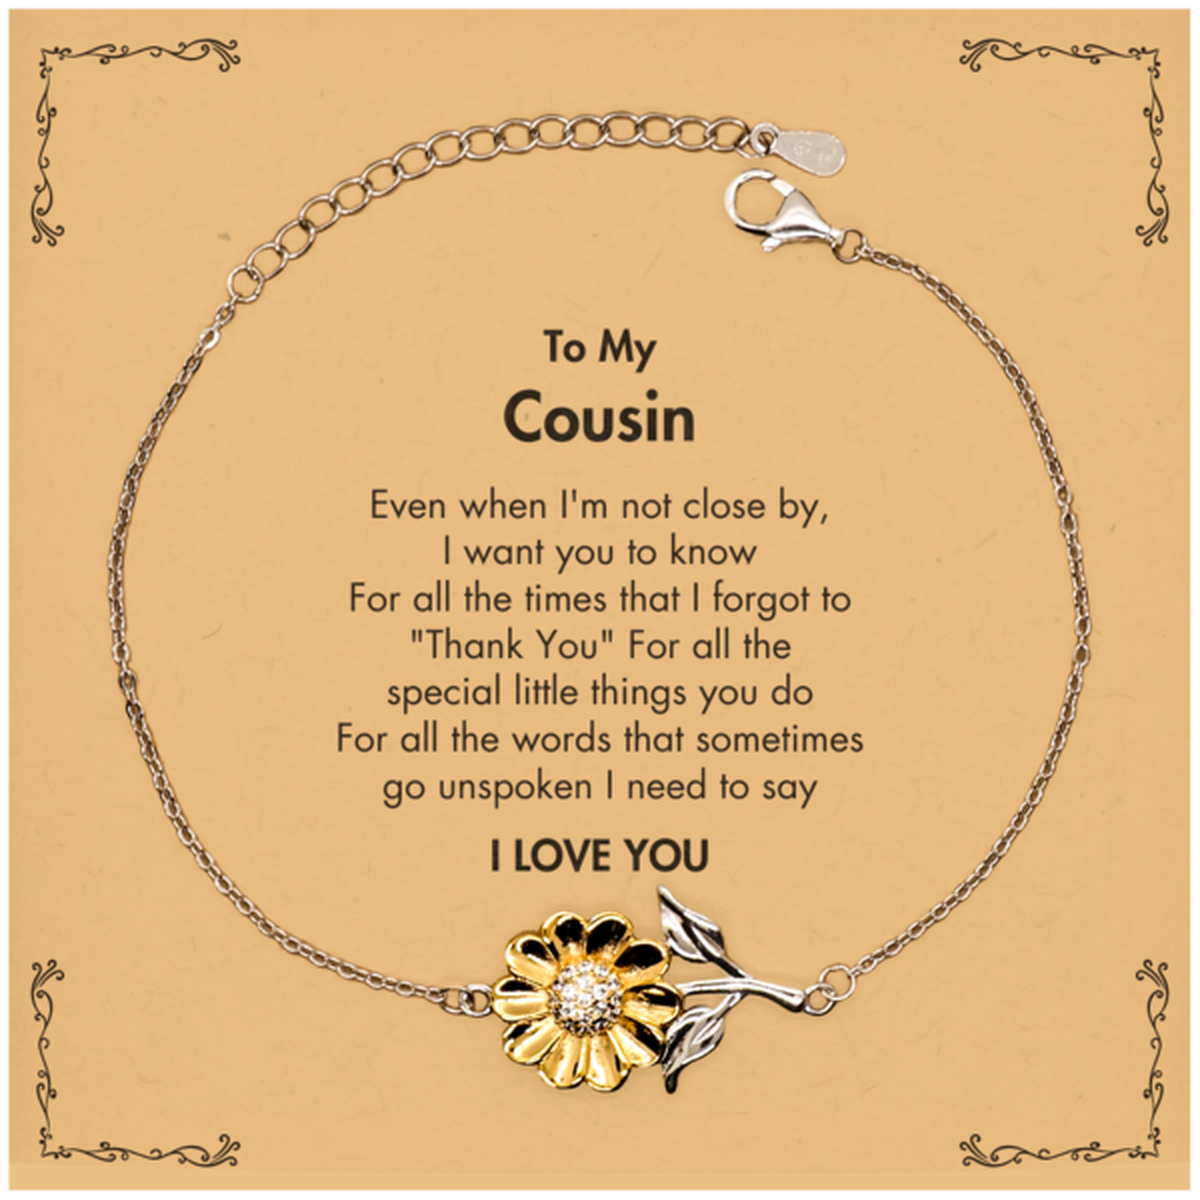 Thank You Gifts for Cousin, Keepsake Sunflower Bracelet Gifts for Cousin Birthday Mother's day Father's Day Cousin For all the words That sometimes go unspoken I need to say I LOVE YOU